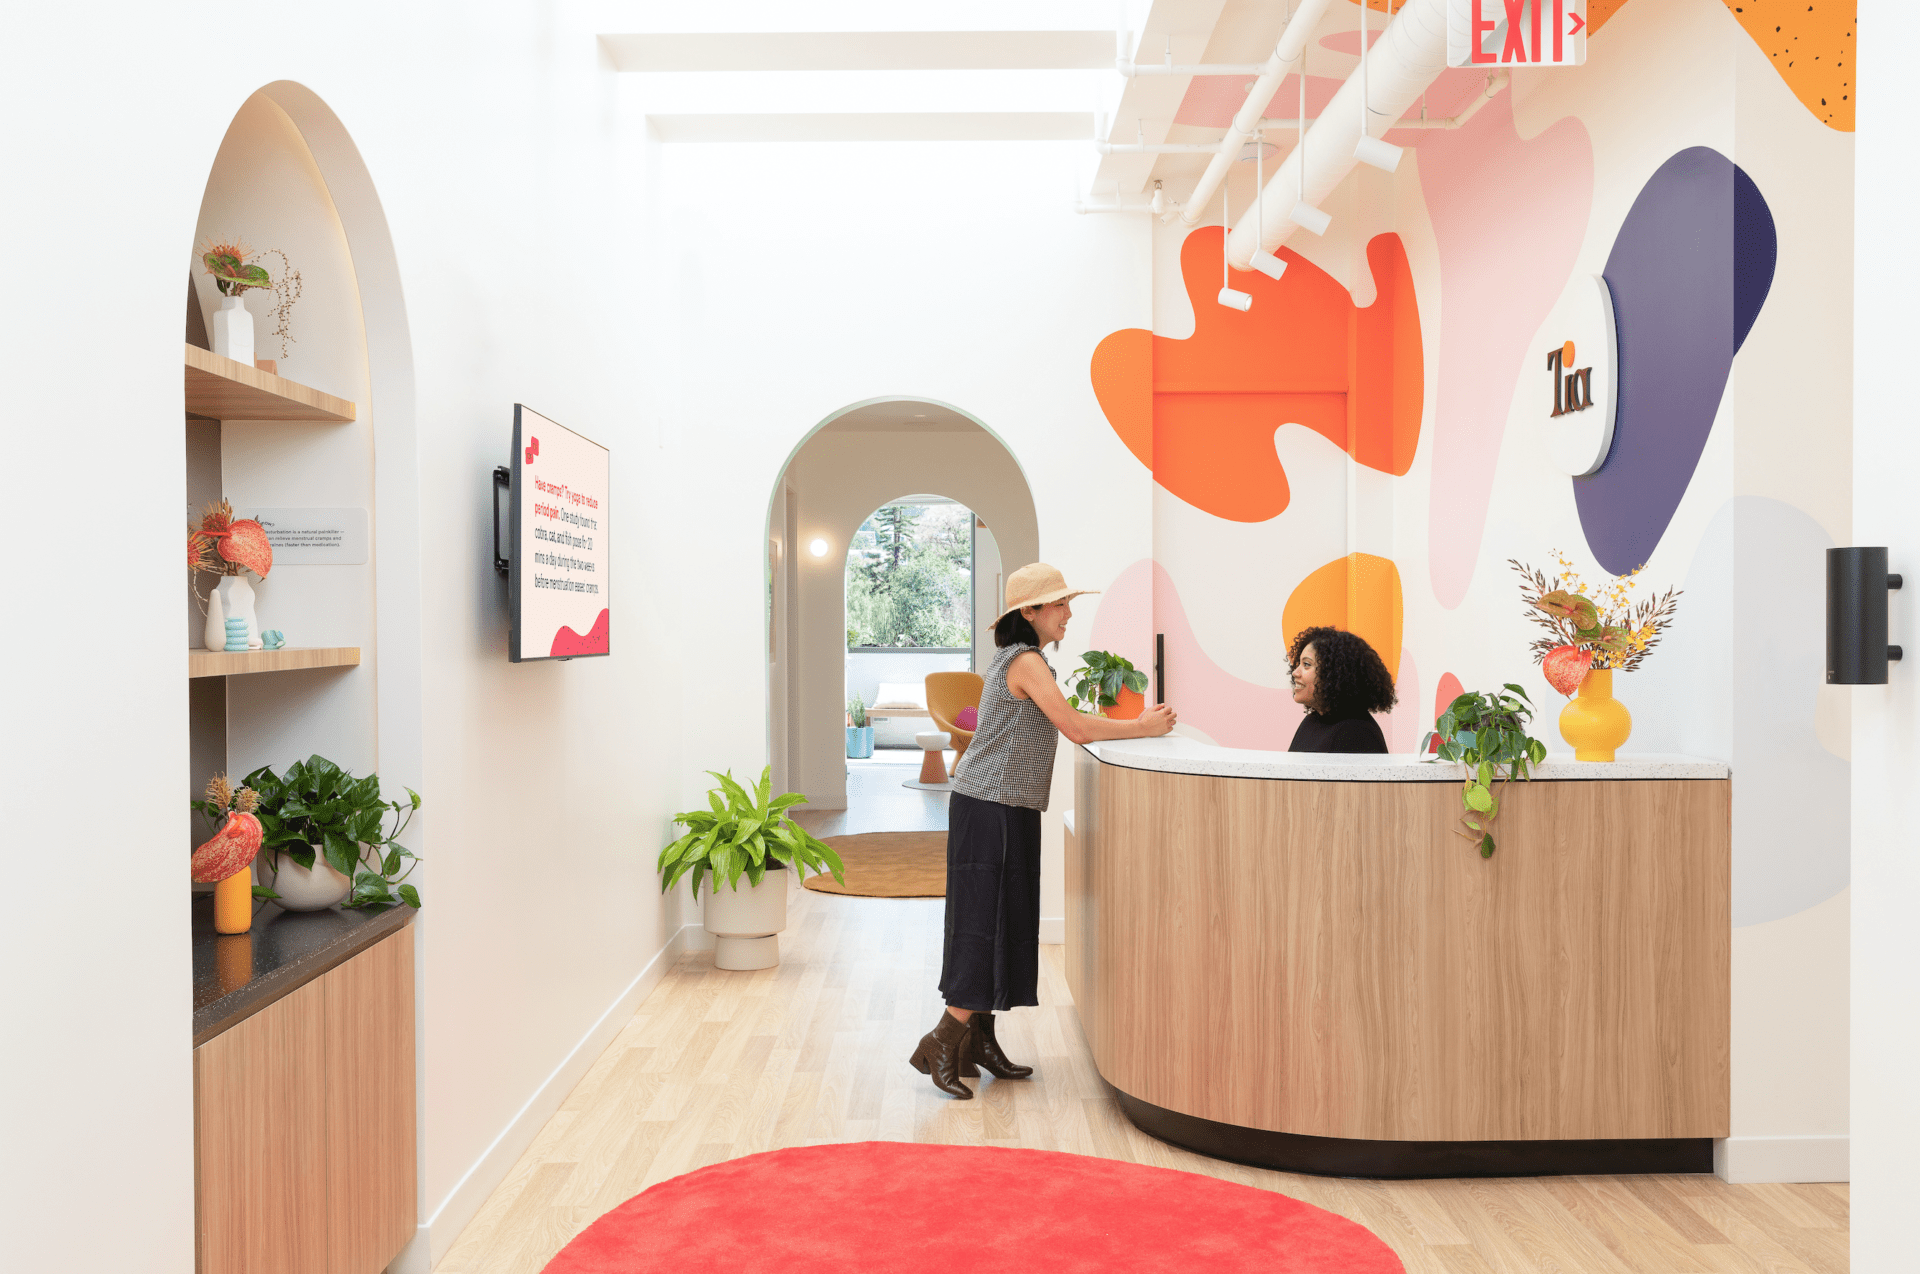 Alda Ly Architecture designs vibrant space for Tia's new Los Angeles outpost